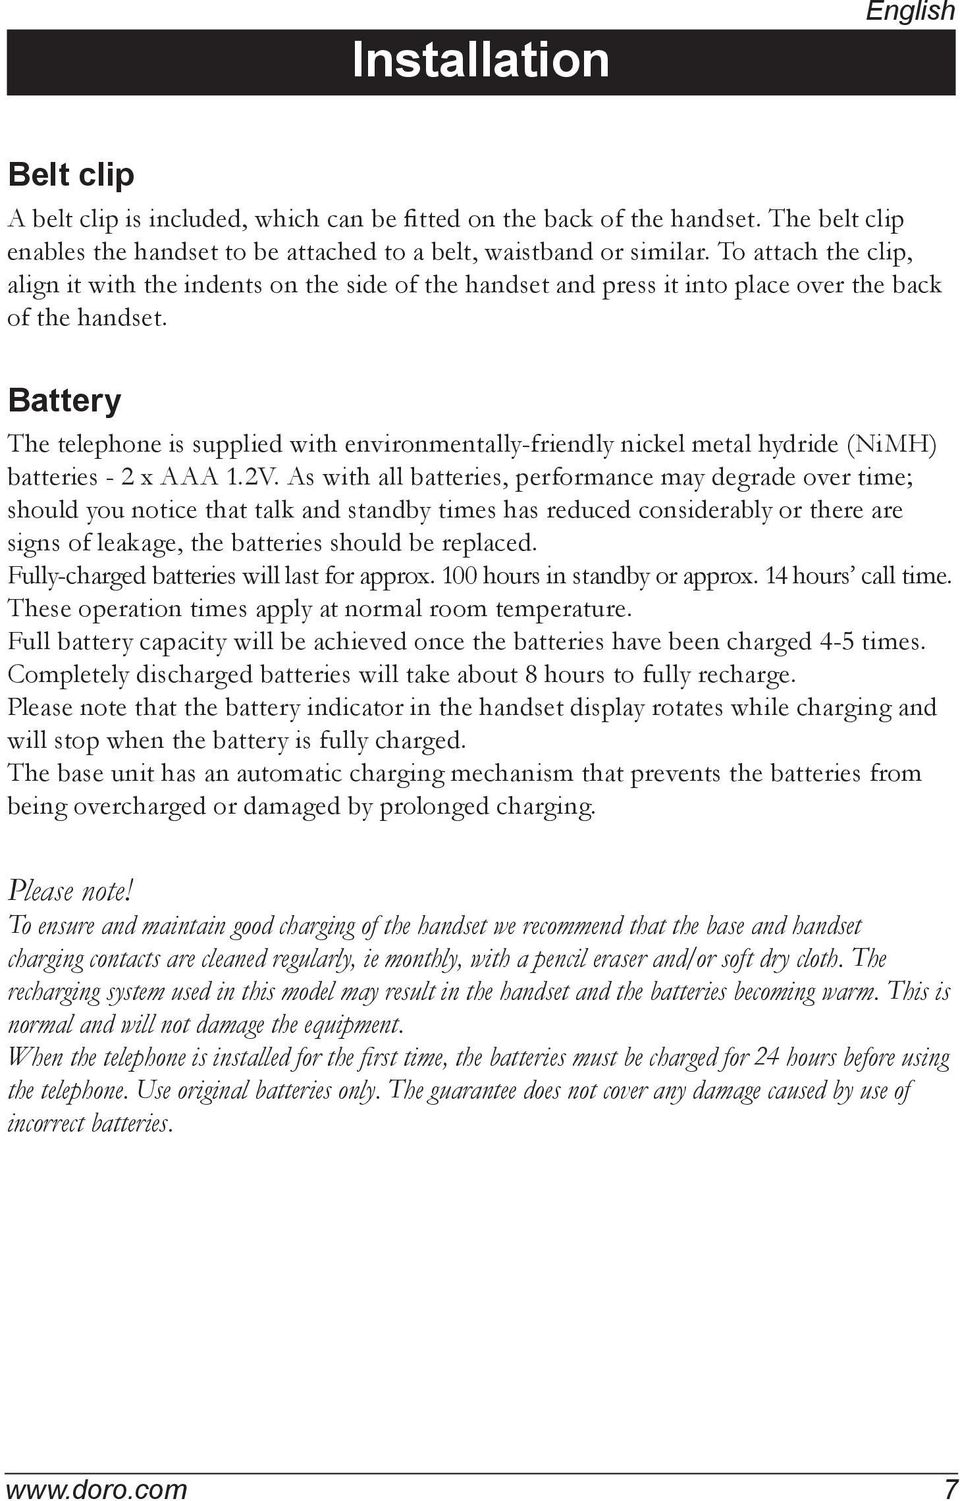 Battery The telephone is supplied with environmentally-friendly nickel metal hydride (NiMH) batteries - 2 x AAA 1.2V.